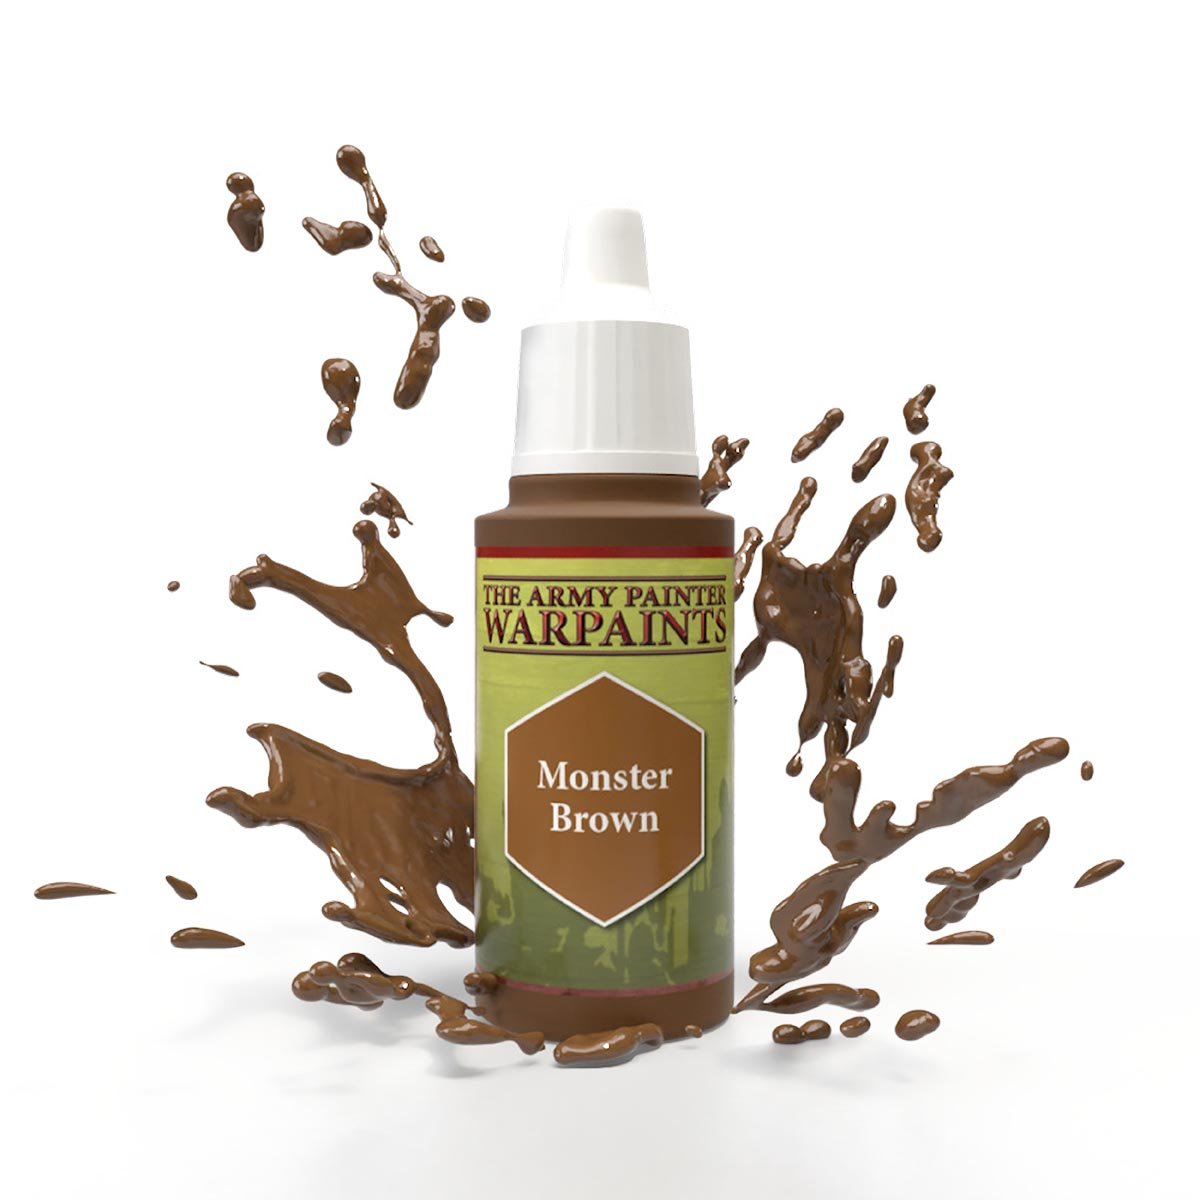 The Army Painter Warpaints WP1120 Monster Brown Acrylic Paint 18ml bottle